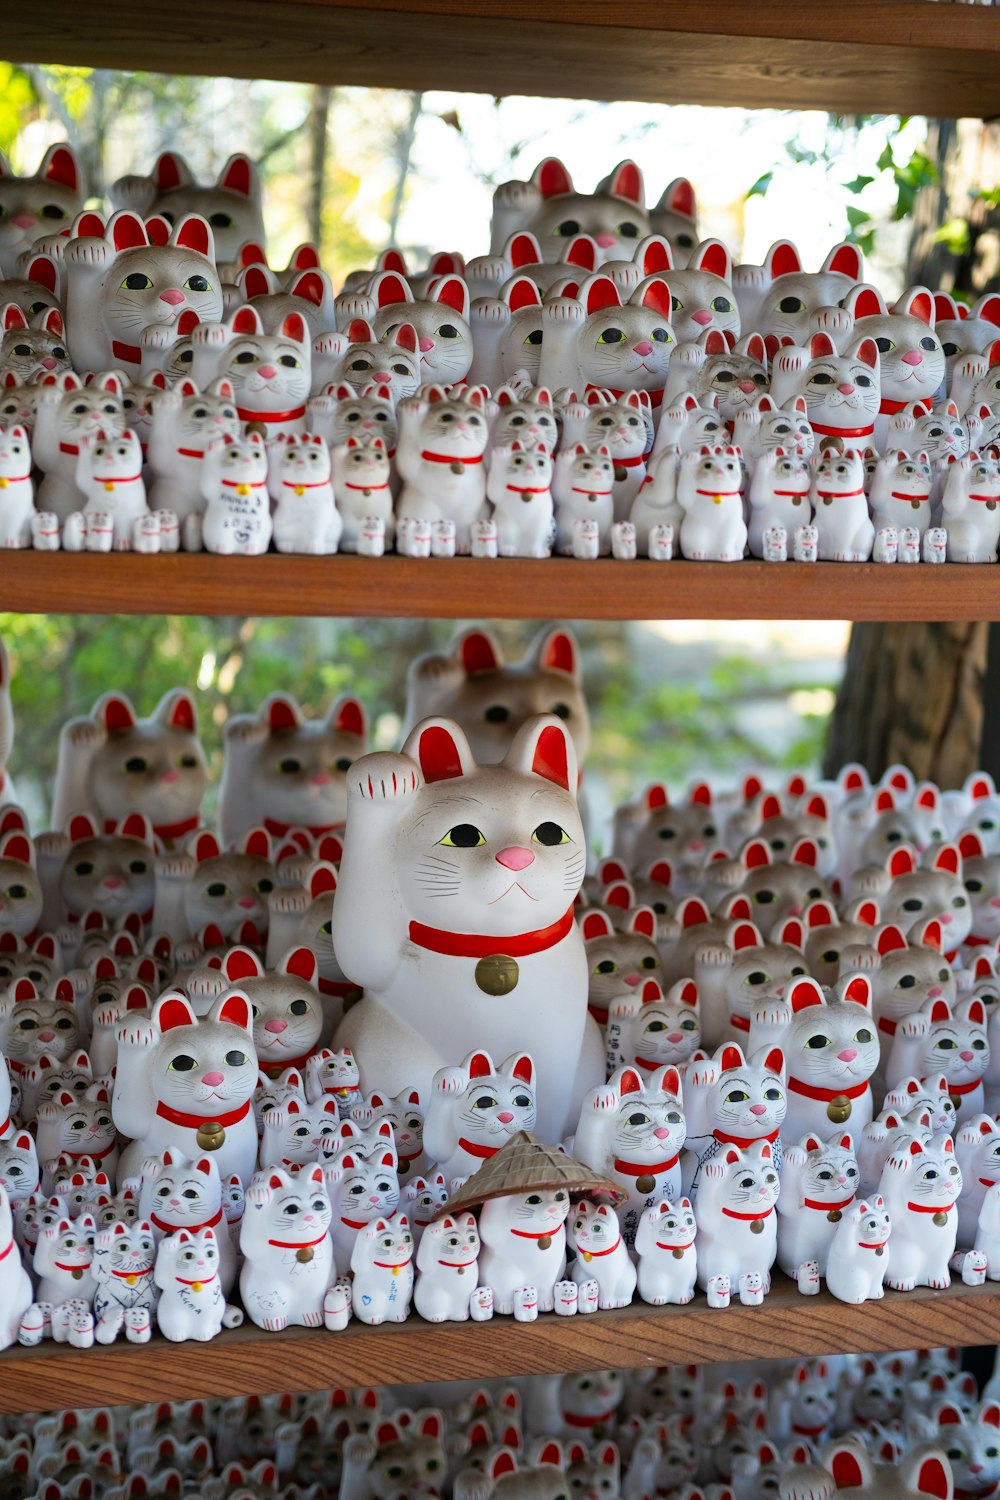 a shelf filled with lots of white and red cat figurines